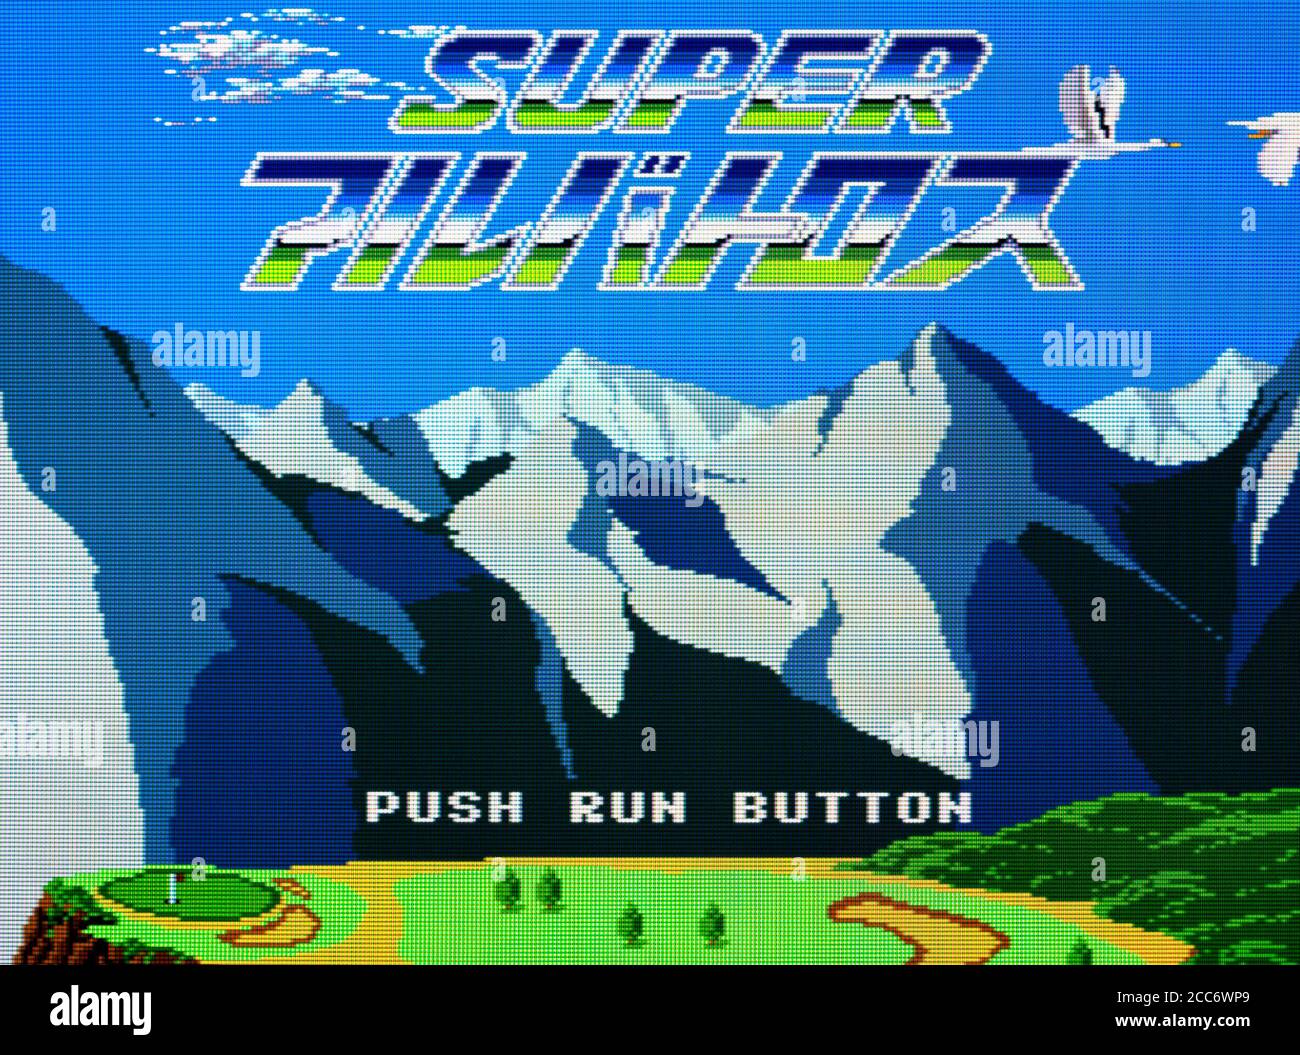 Super Albatros - PC Engine CD Videogame - Editorial use only Stock Photo